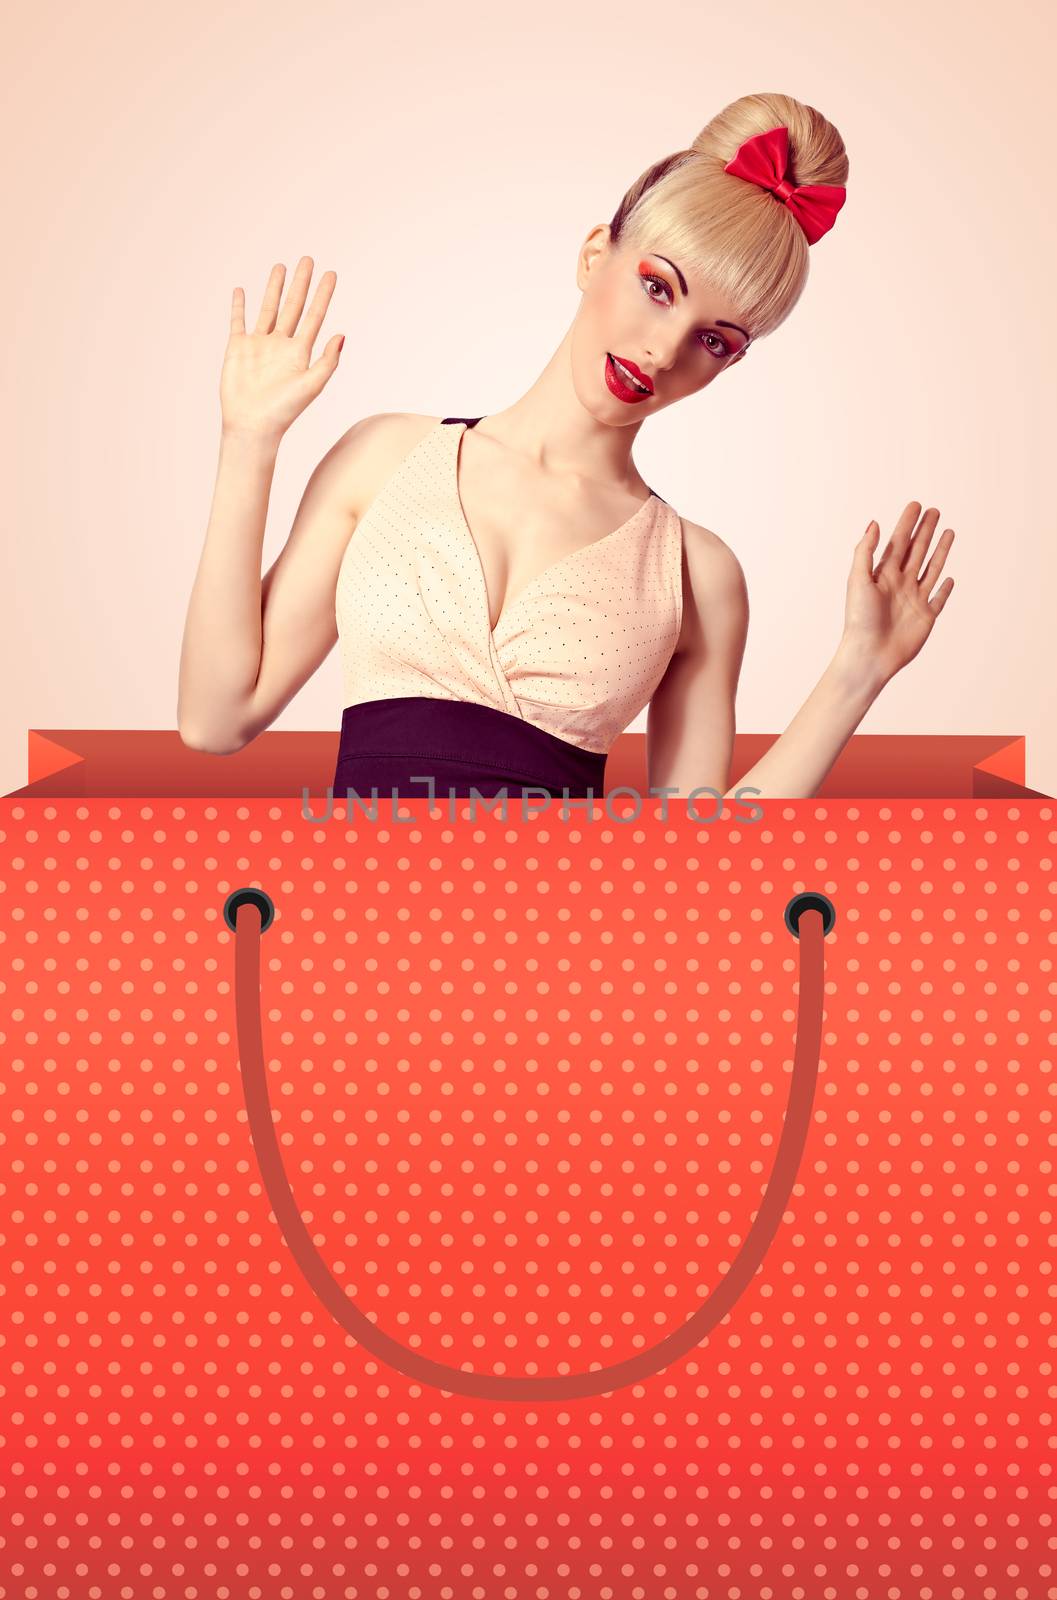 Fashion beauty woman huge shopping bag surprised  by 918